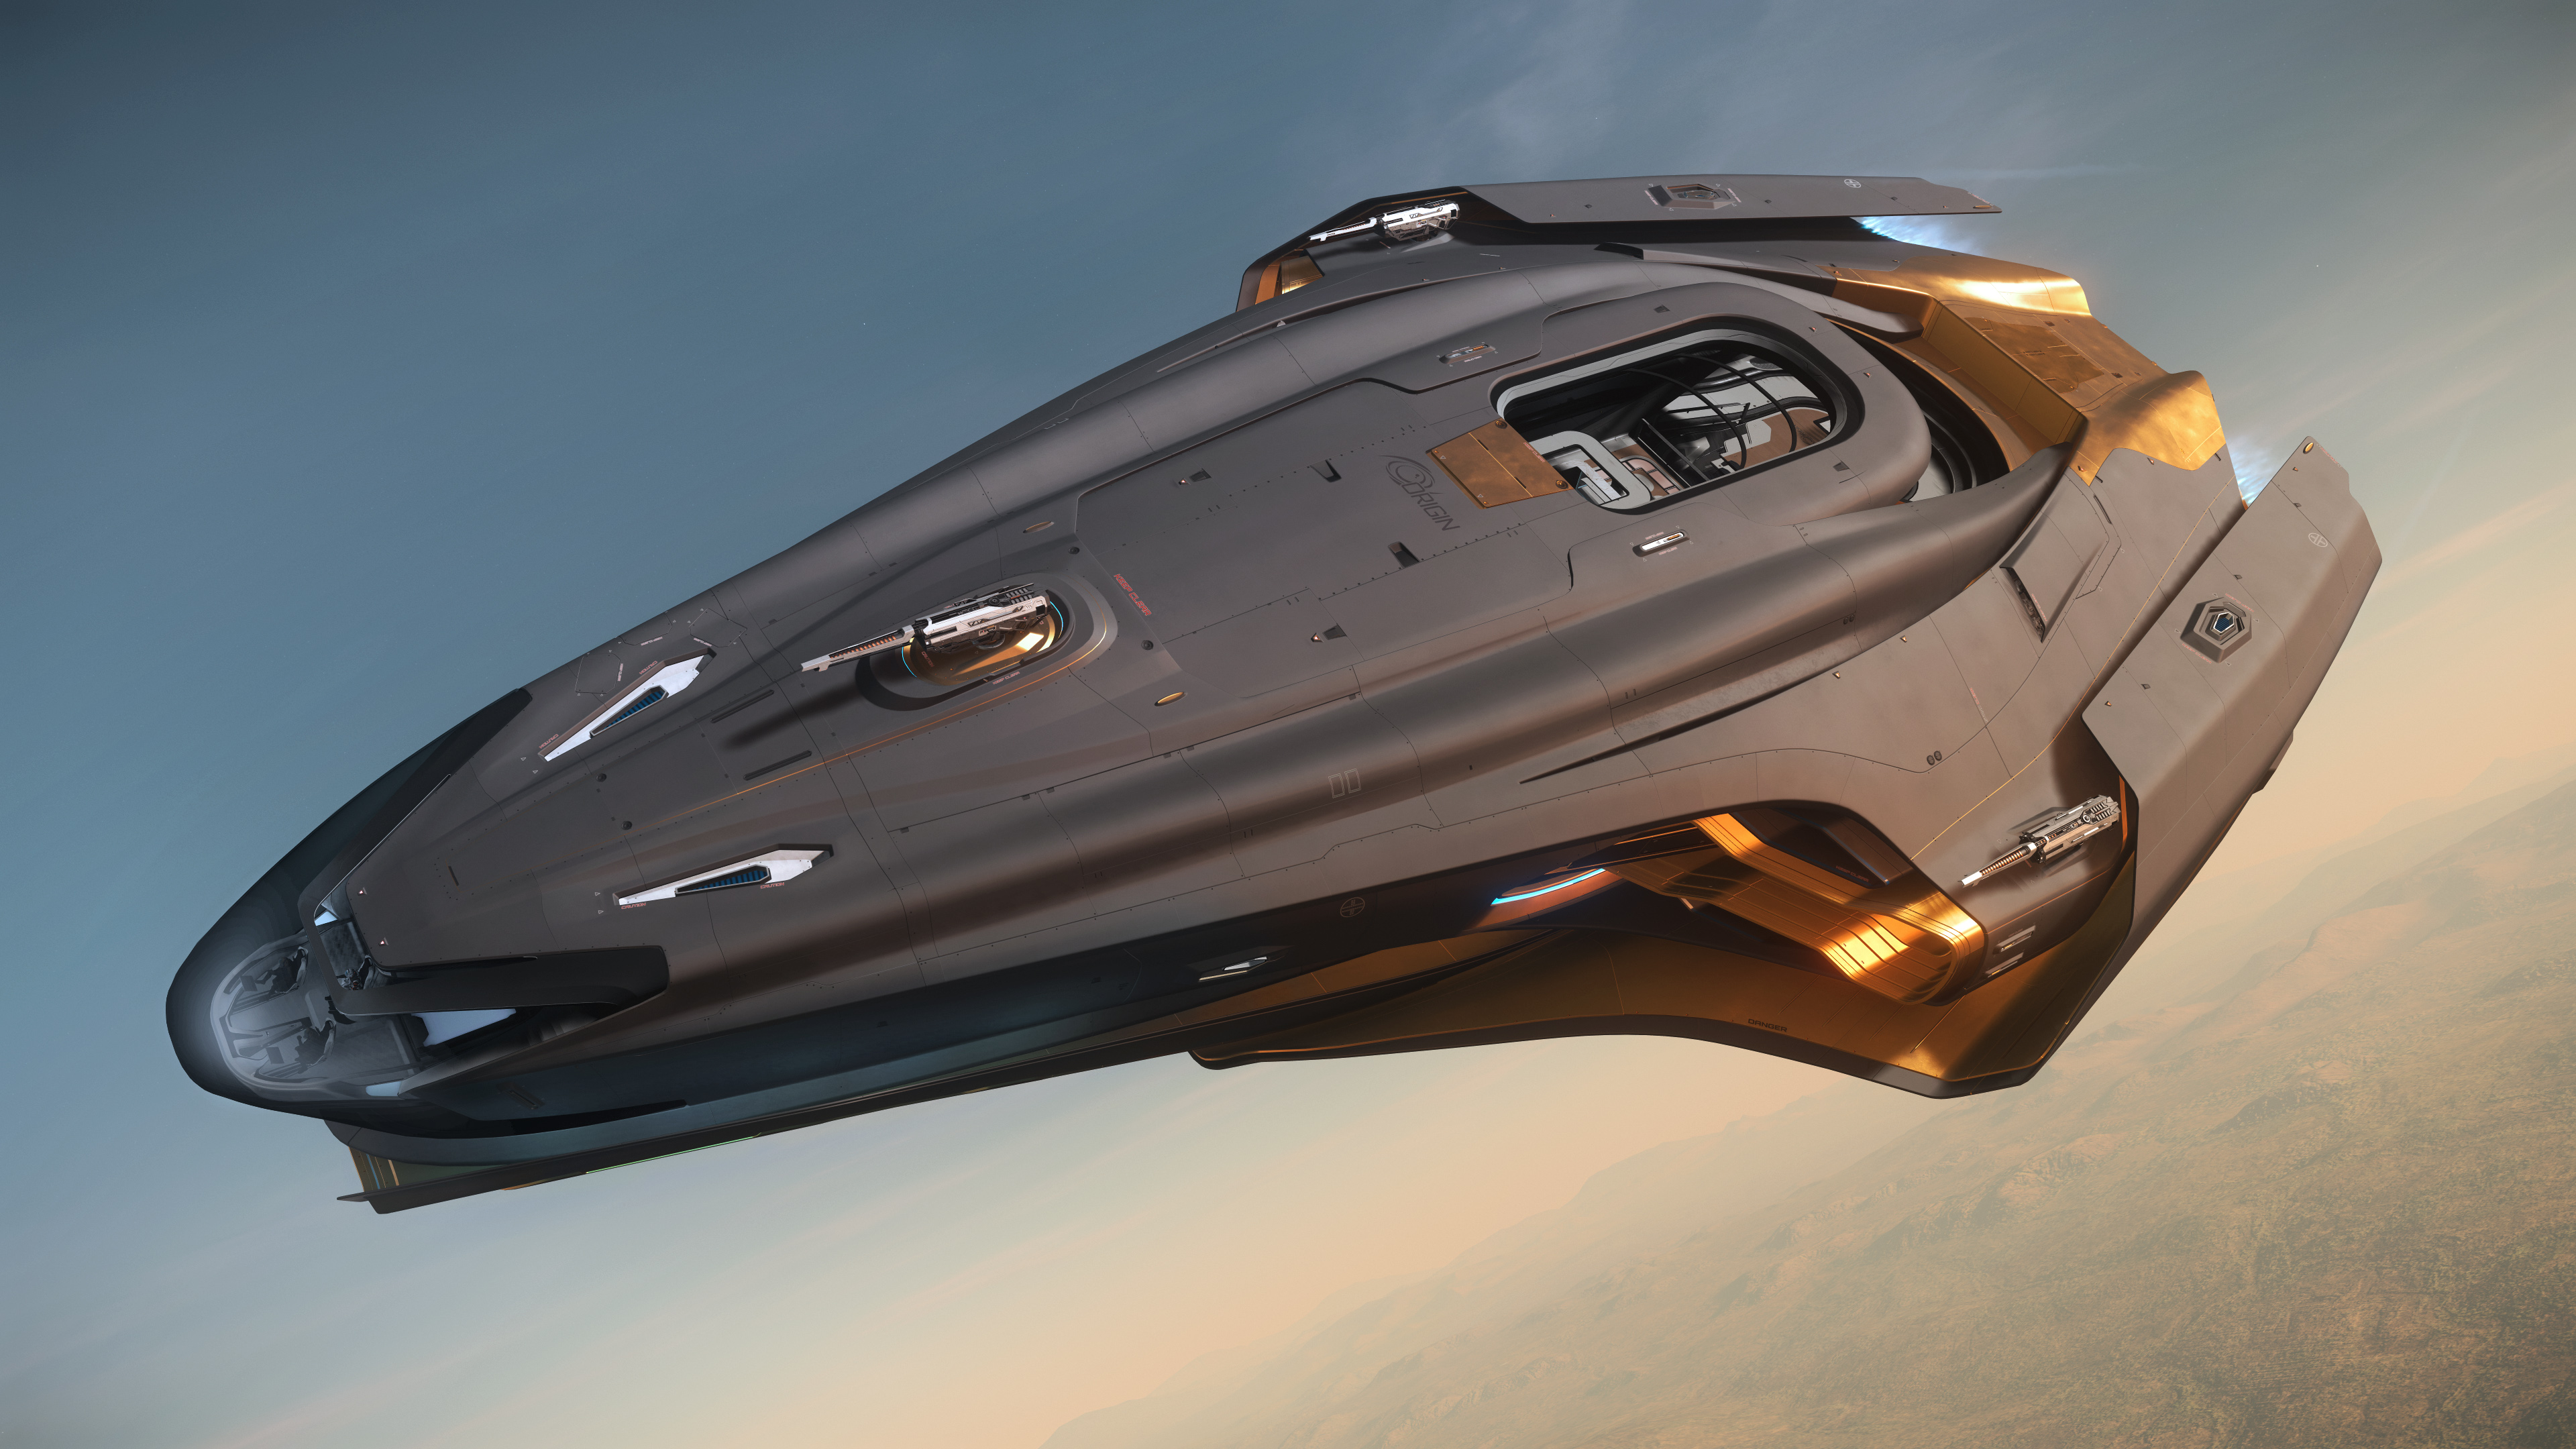 Star Citizen Is Free to Play for a Limited Time, Including a $600 Ship